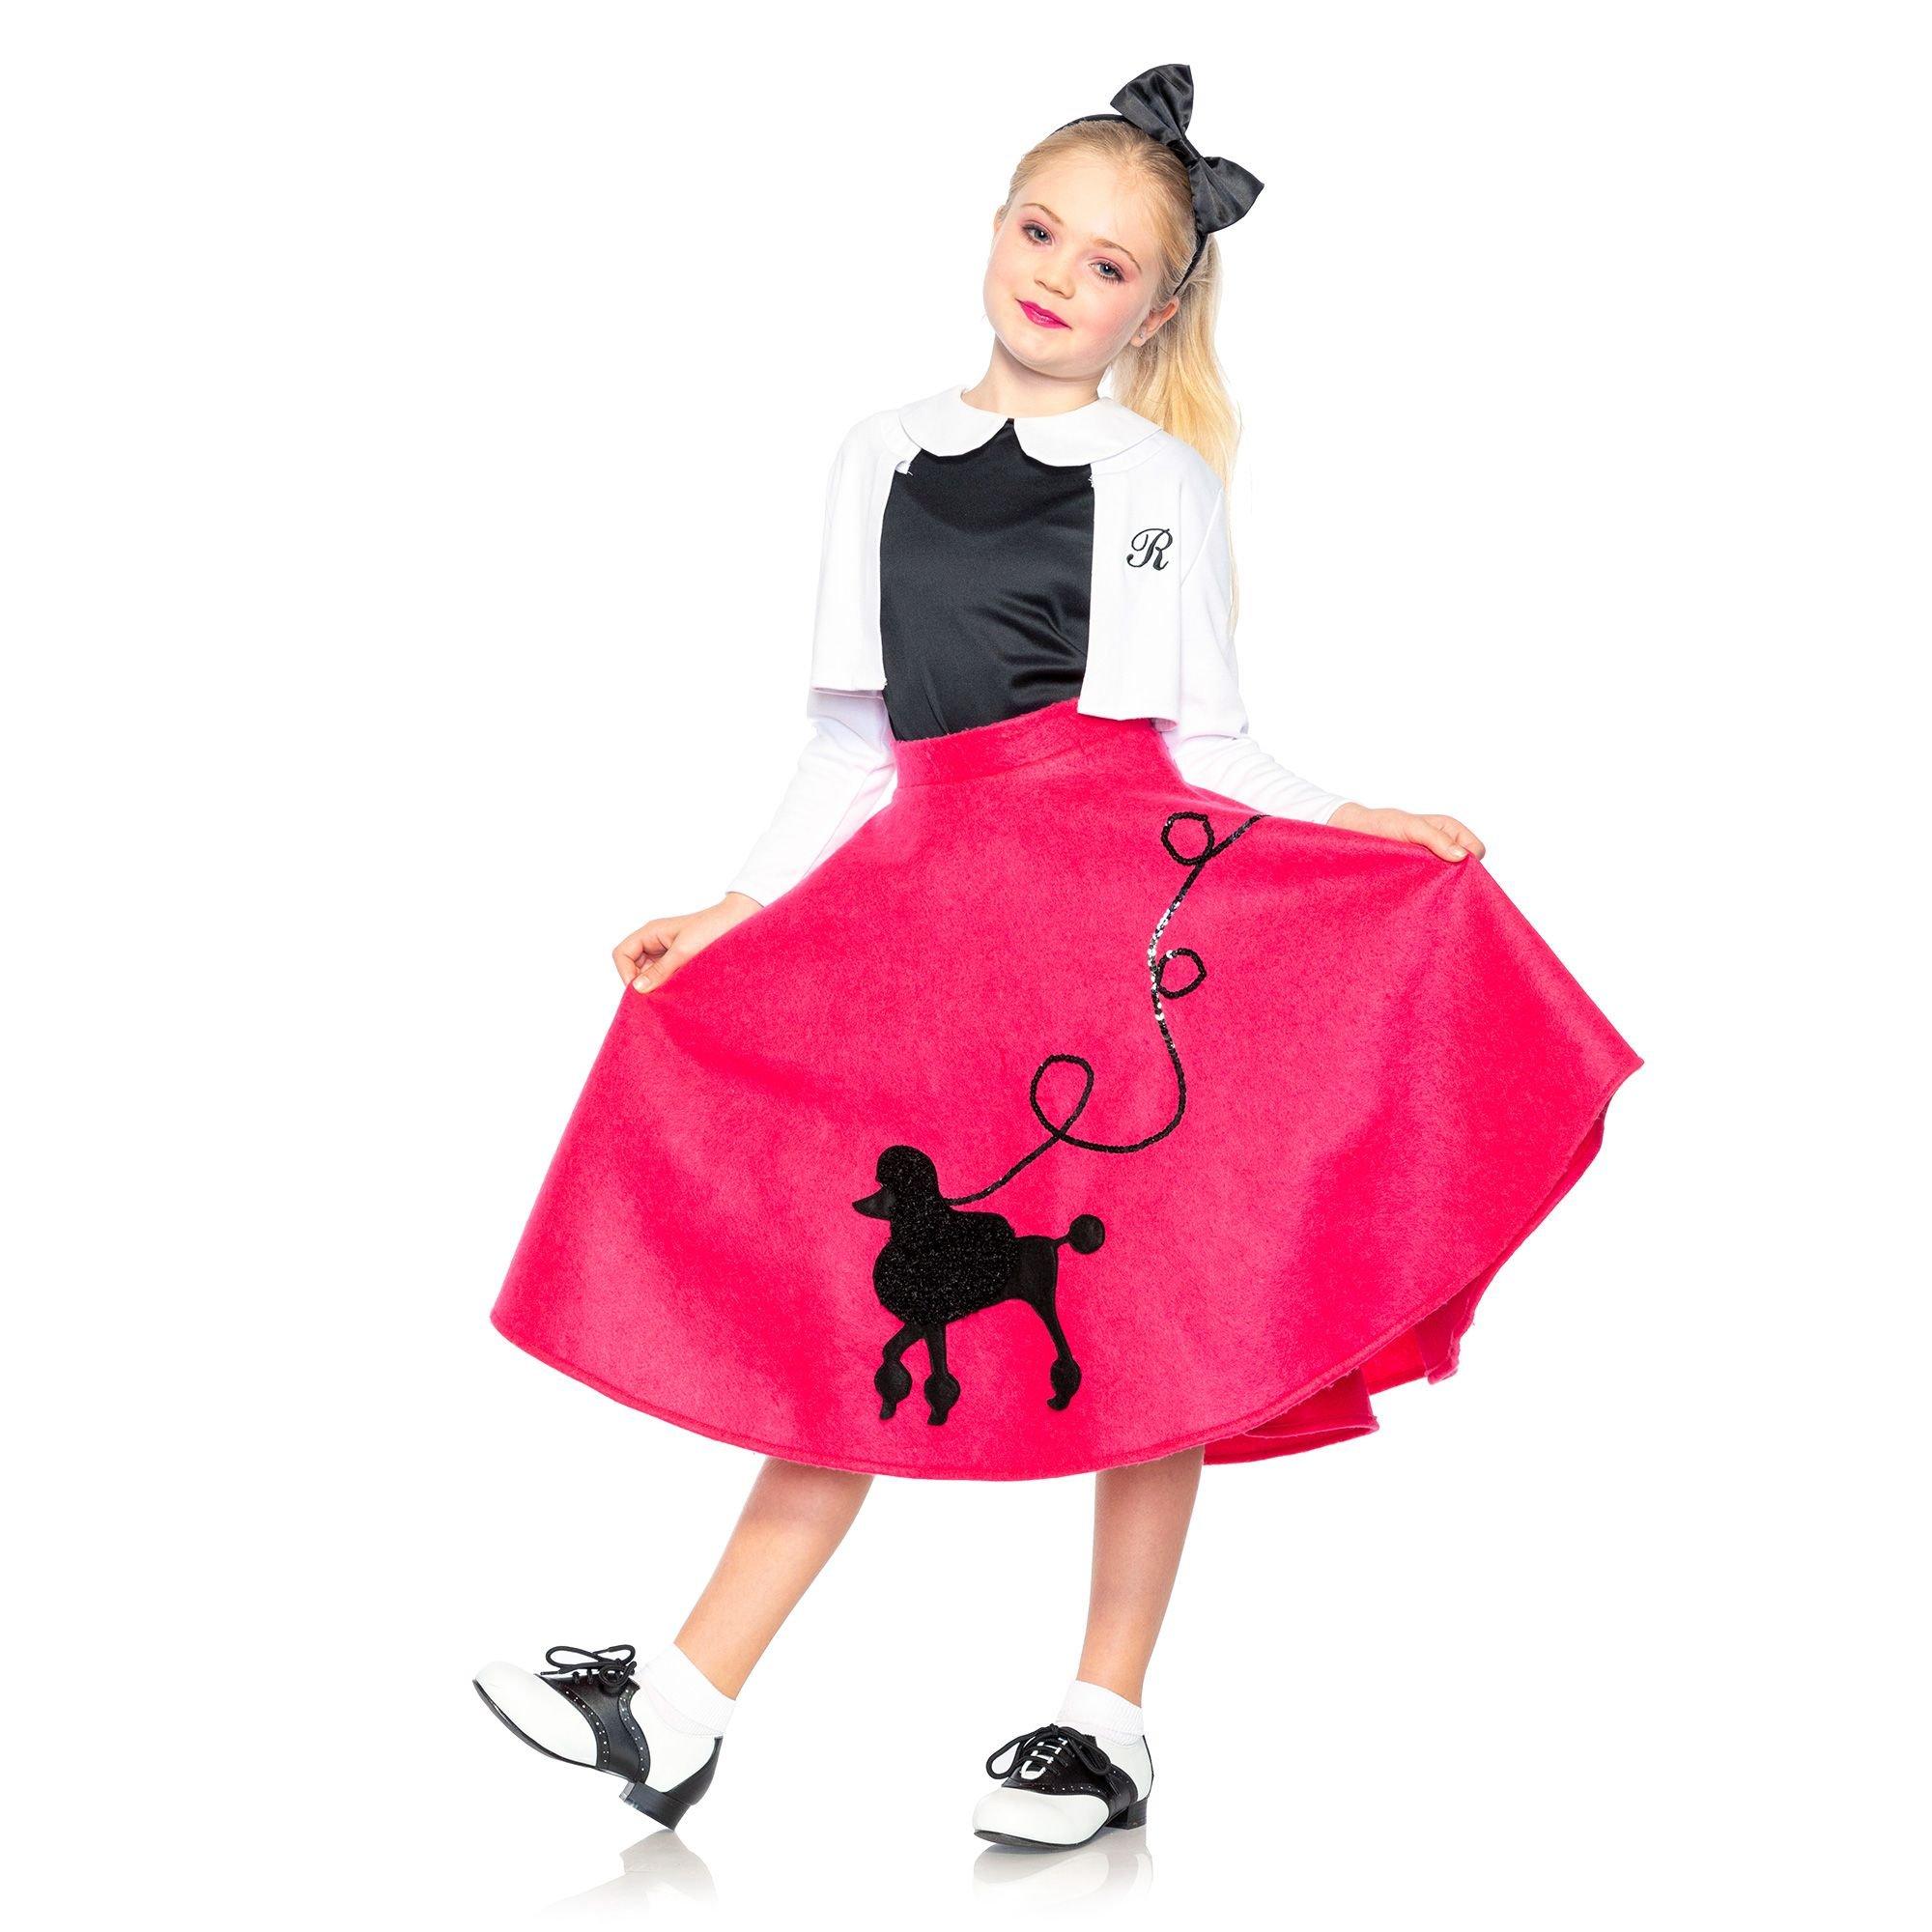 Poodle Skirt 50s Costume for Kids | Party City